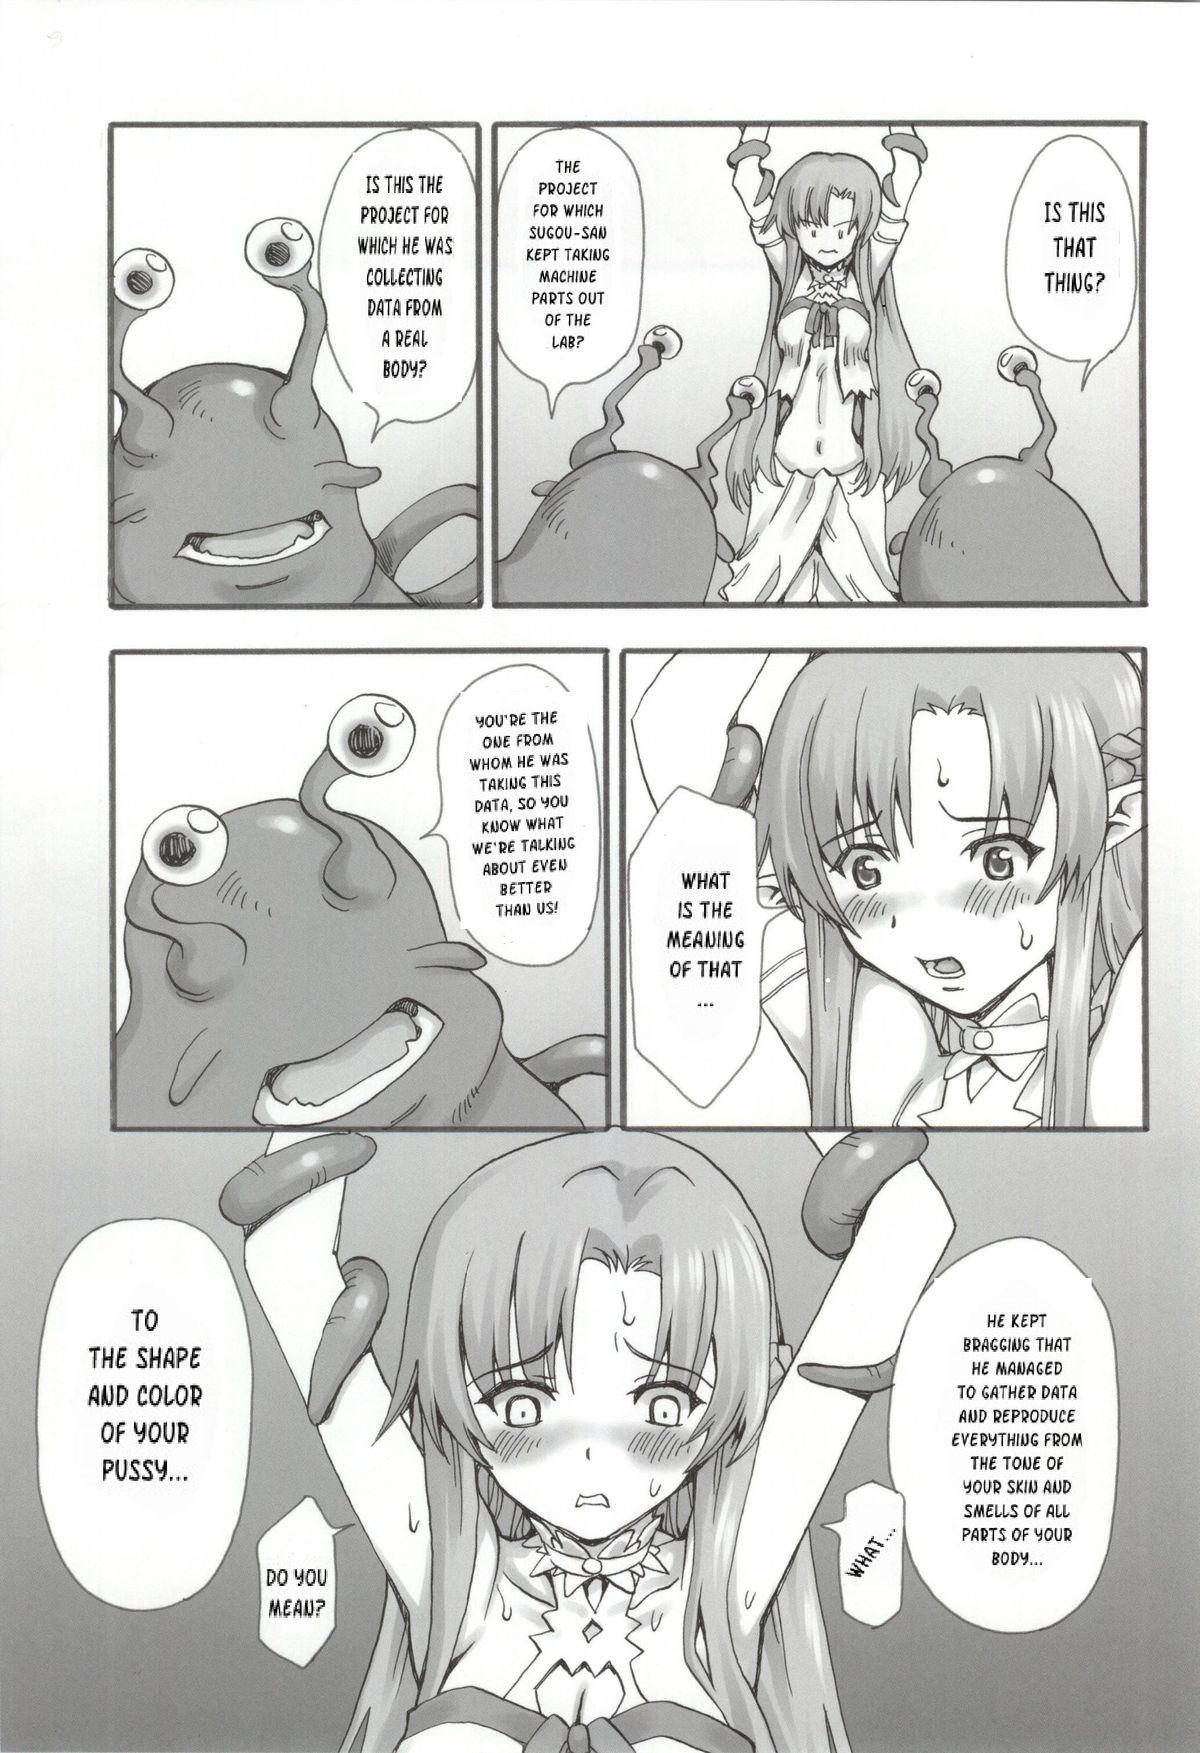 Best Blowjob Datte Kasou Sekai dashi. | After All, It's Just A Virtual World. - Sword art online Gay Group - Page 6